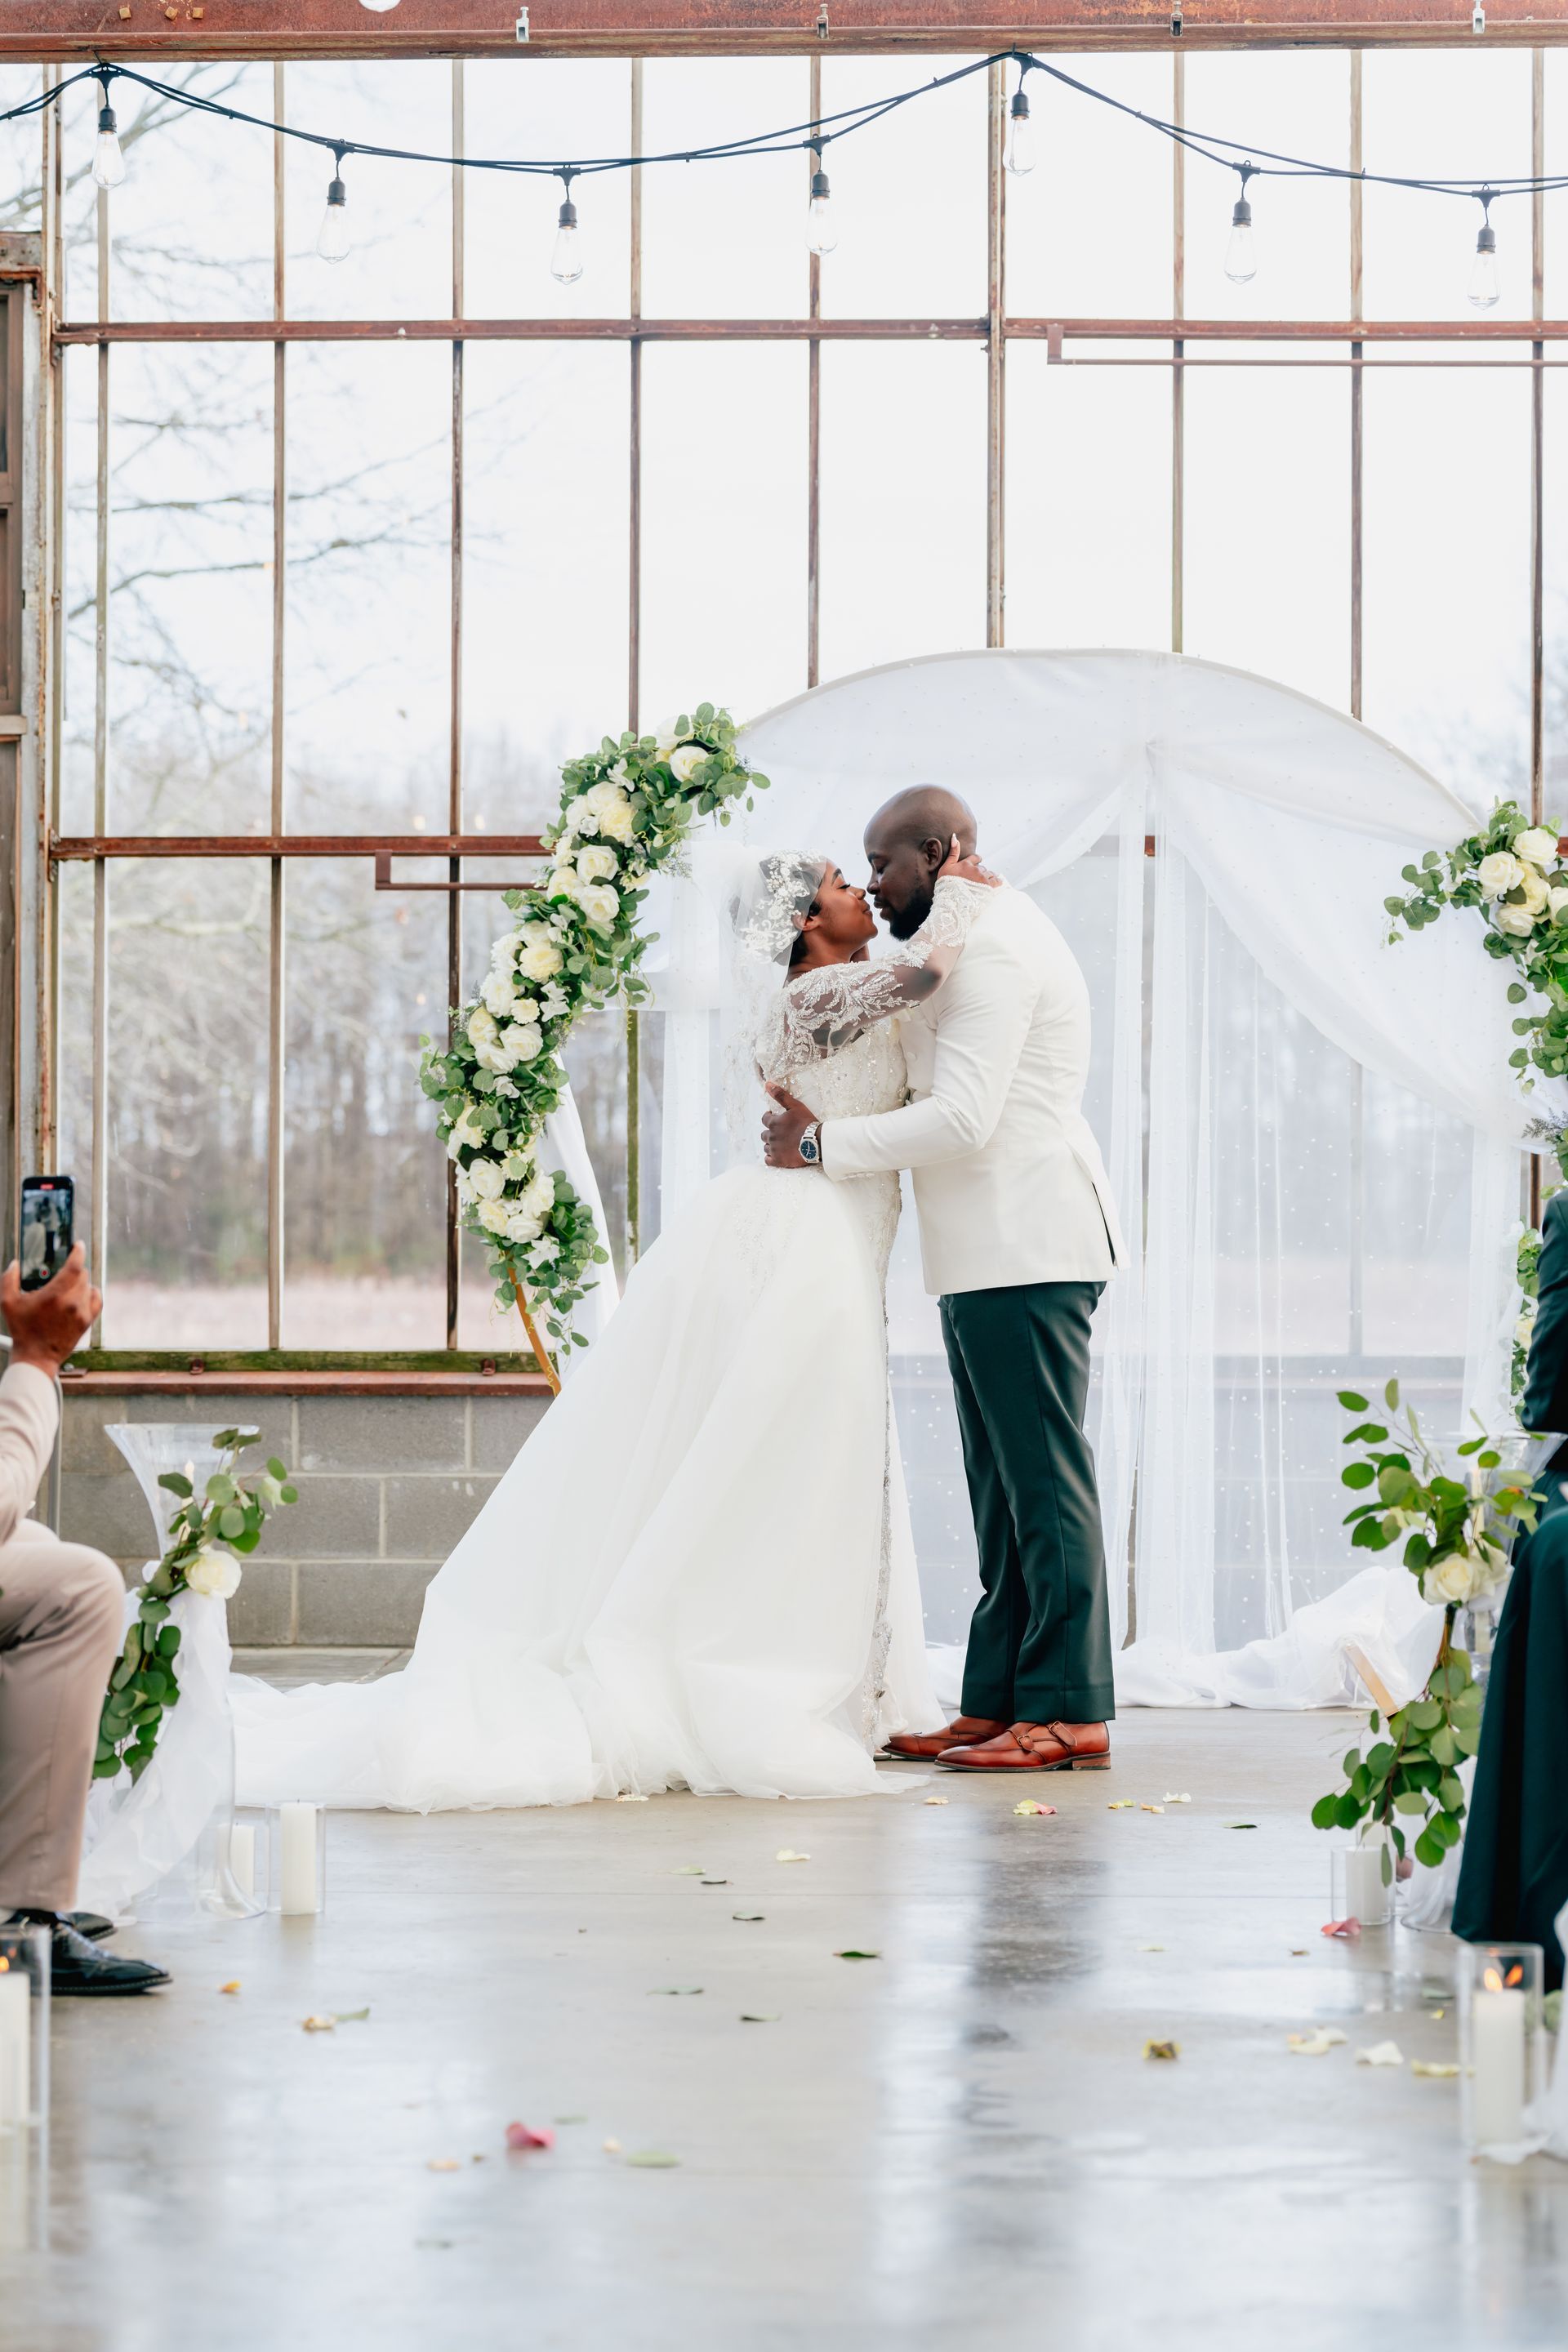 A bride and groom are kissing during their wedding ceremony in jorgensen farm oak grove greenhouse.